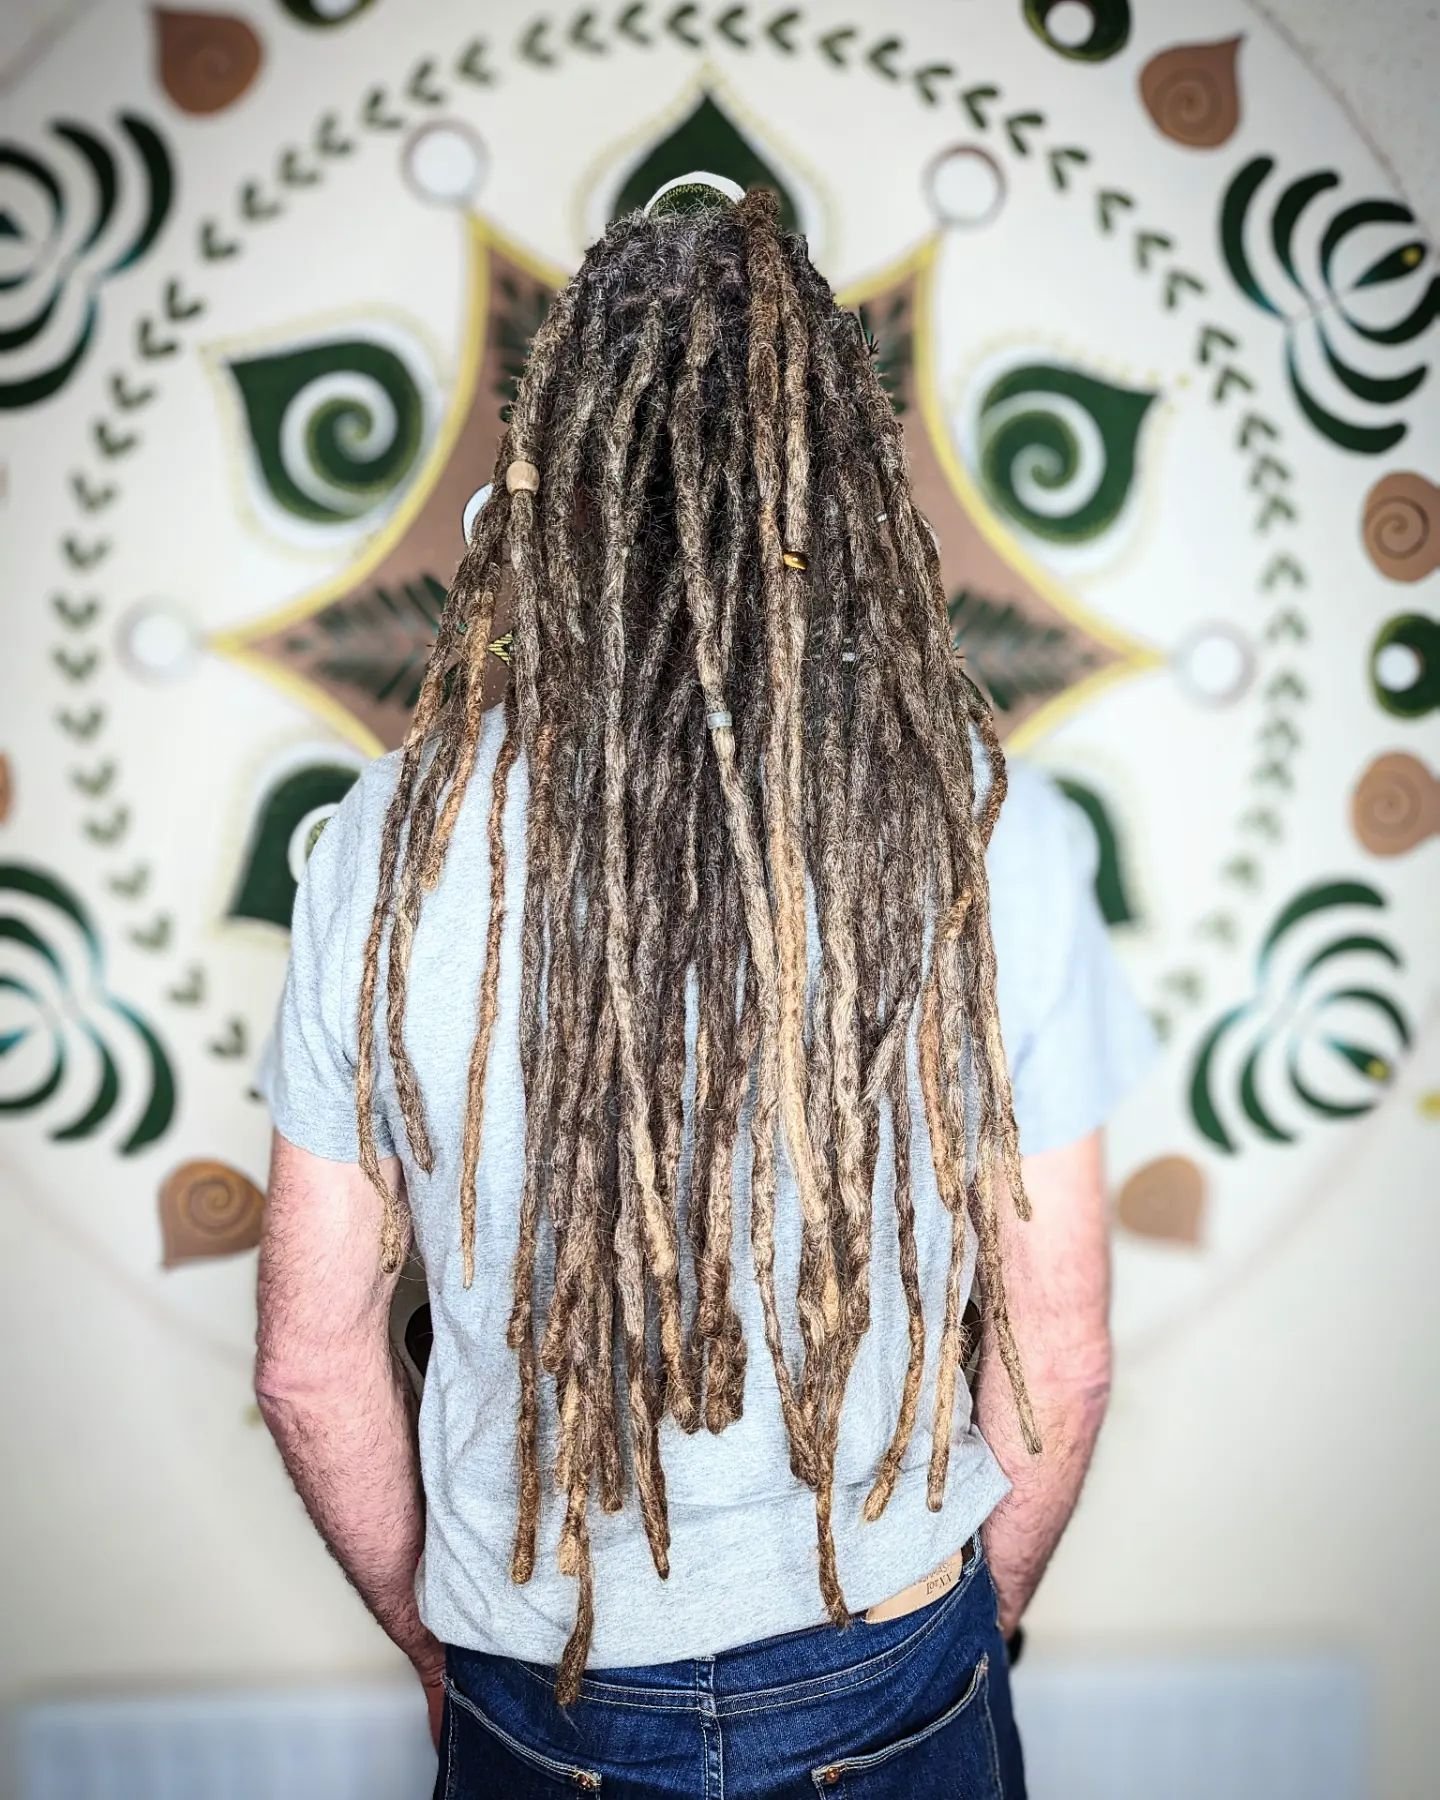 A root tidy and some length strengthening for regular client Levi.  I have been tending his locs for about 6 years now. They have grown so much!

I available in May to create new locs, with and without extensions and for all types of maintenance.  Me